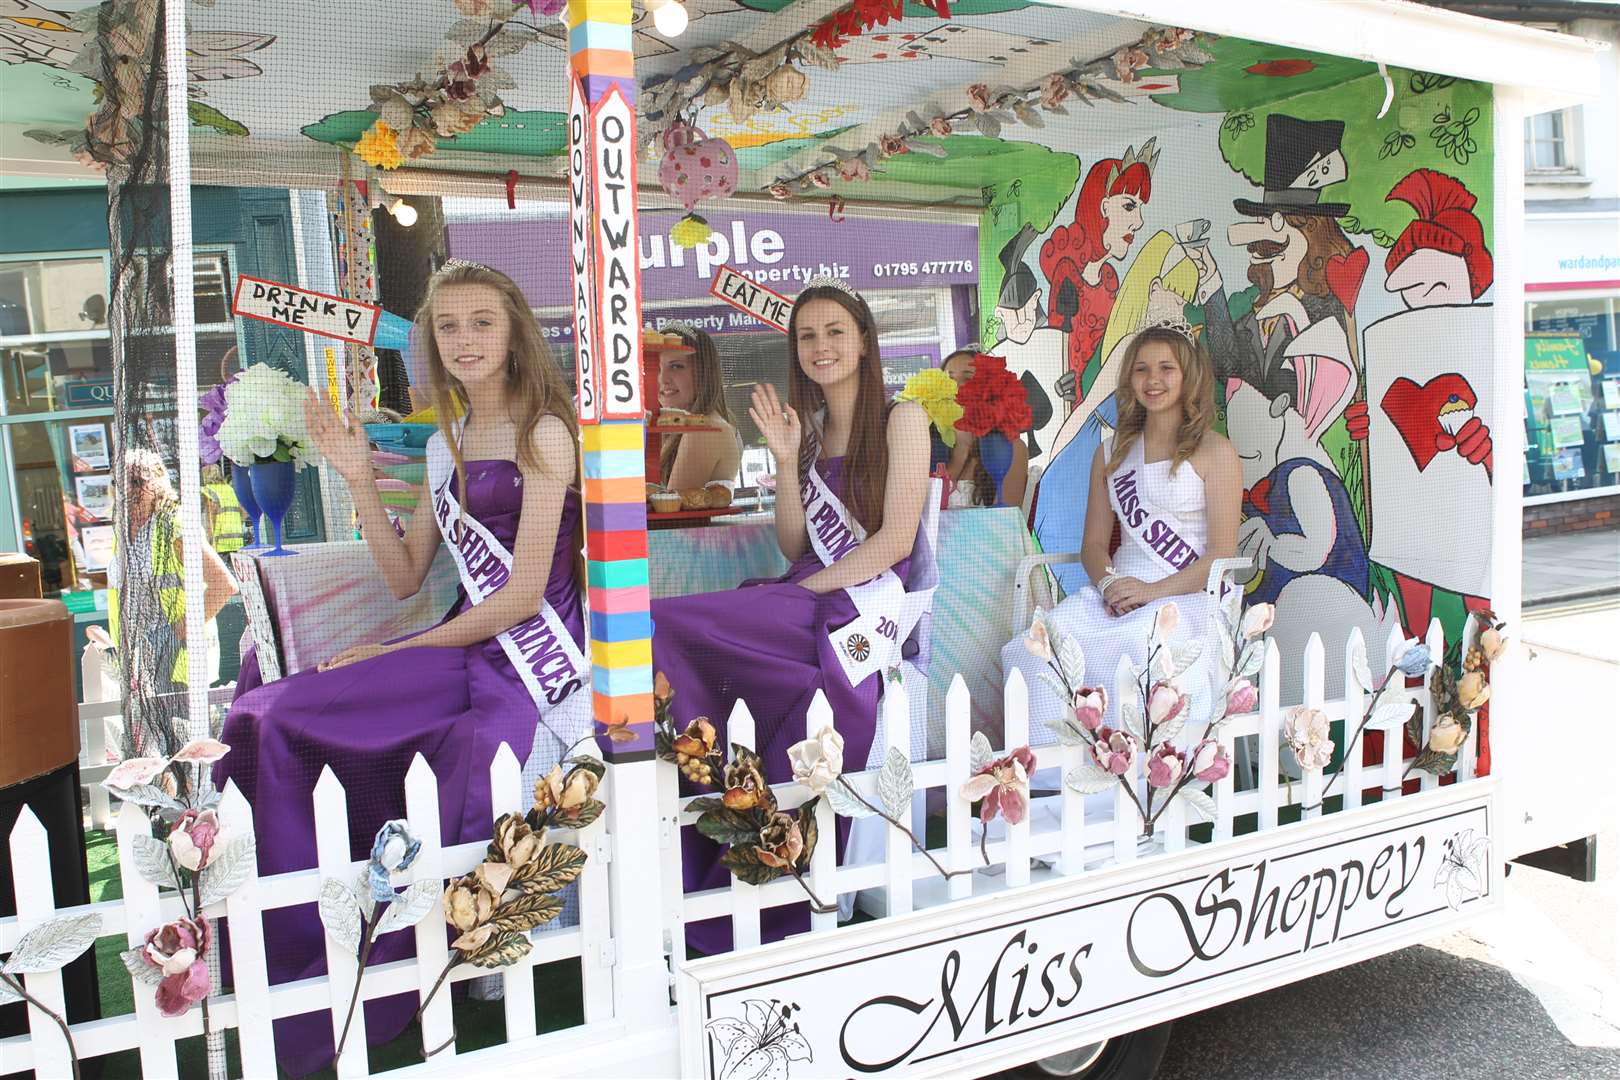 The Miss Sheppey float during the event